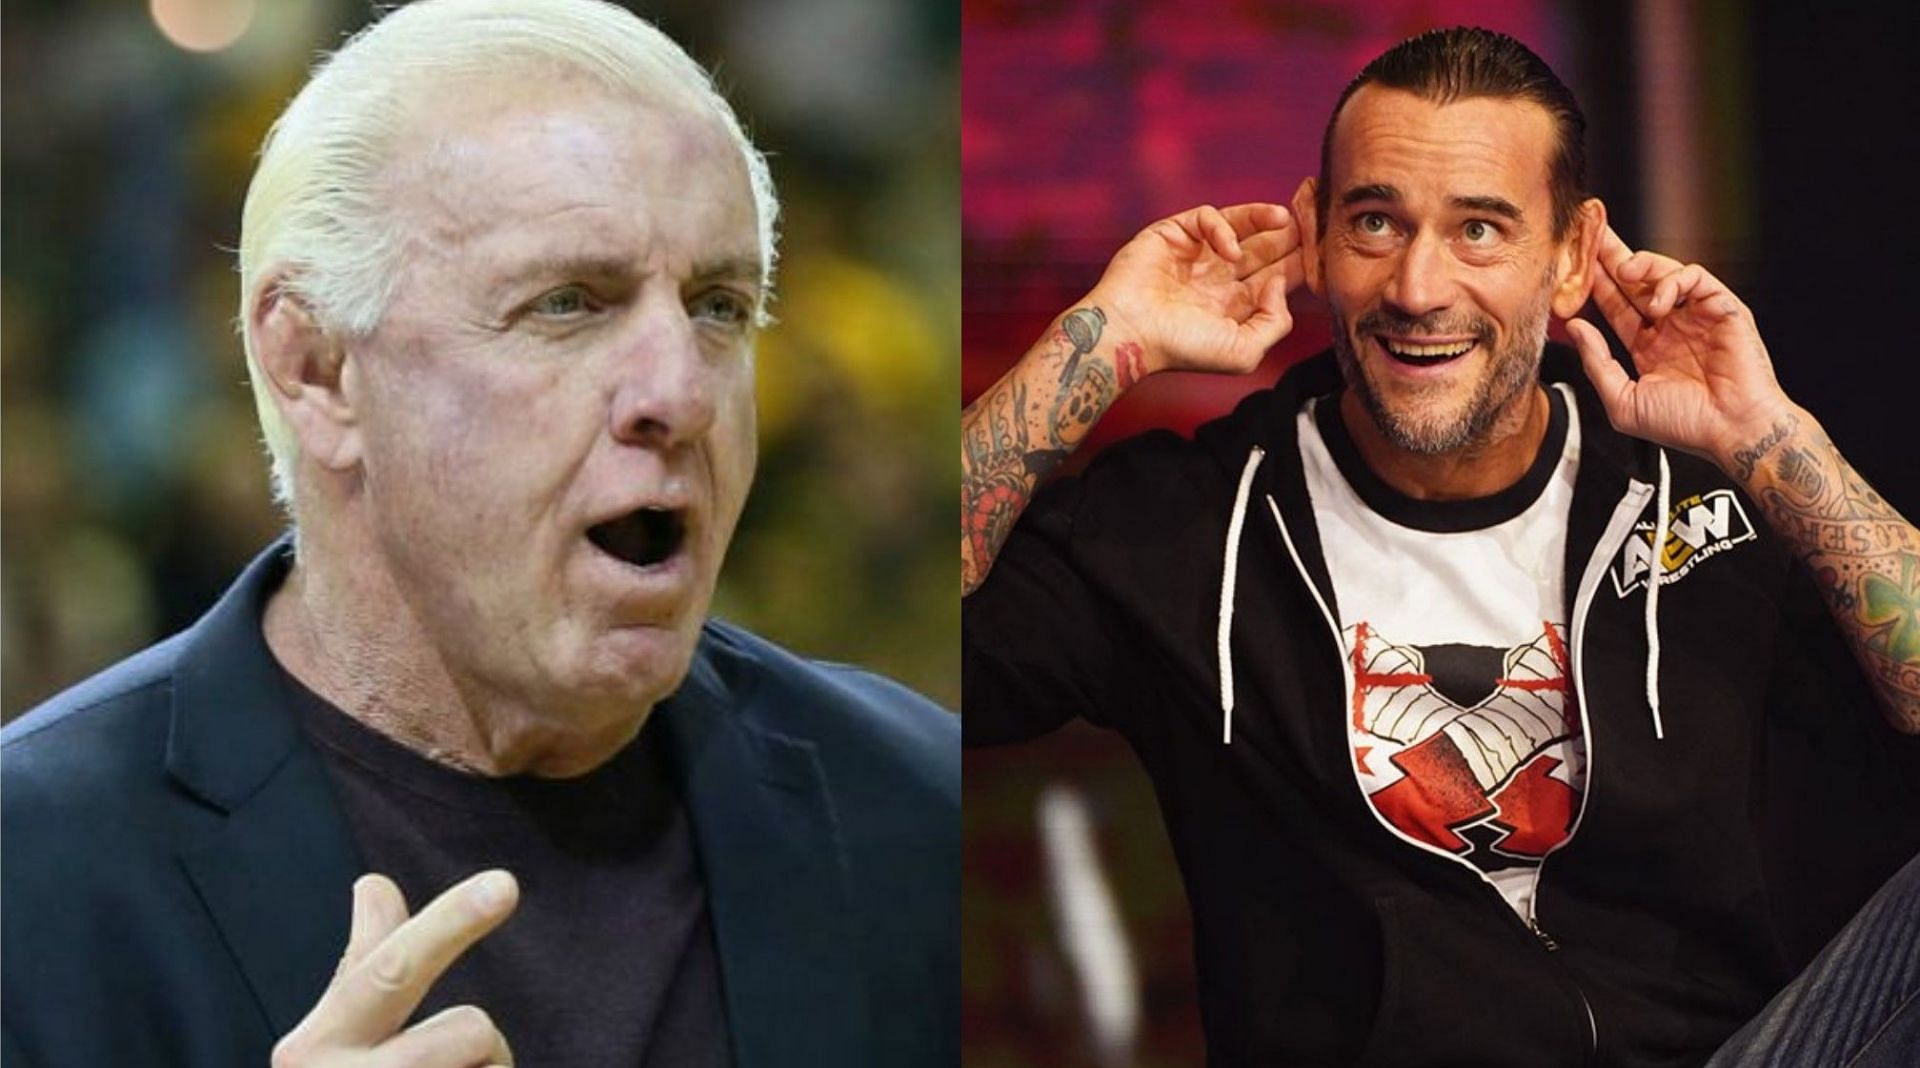 Ric Flair (left) and CM Punk (right)